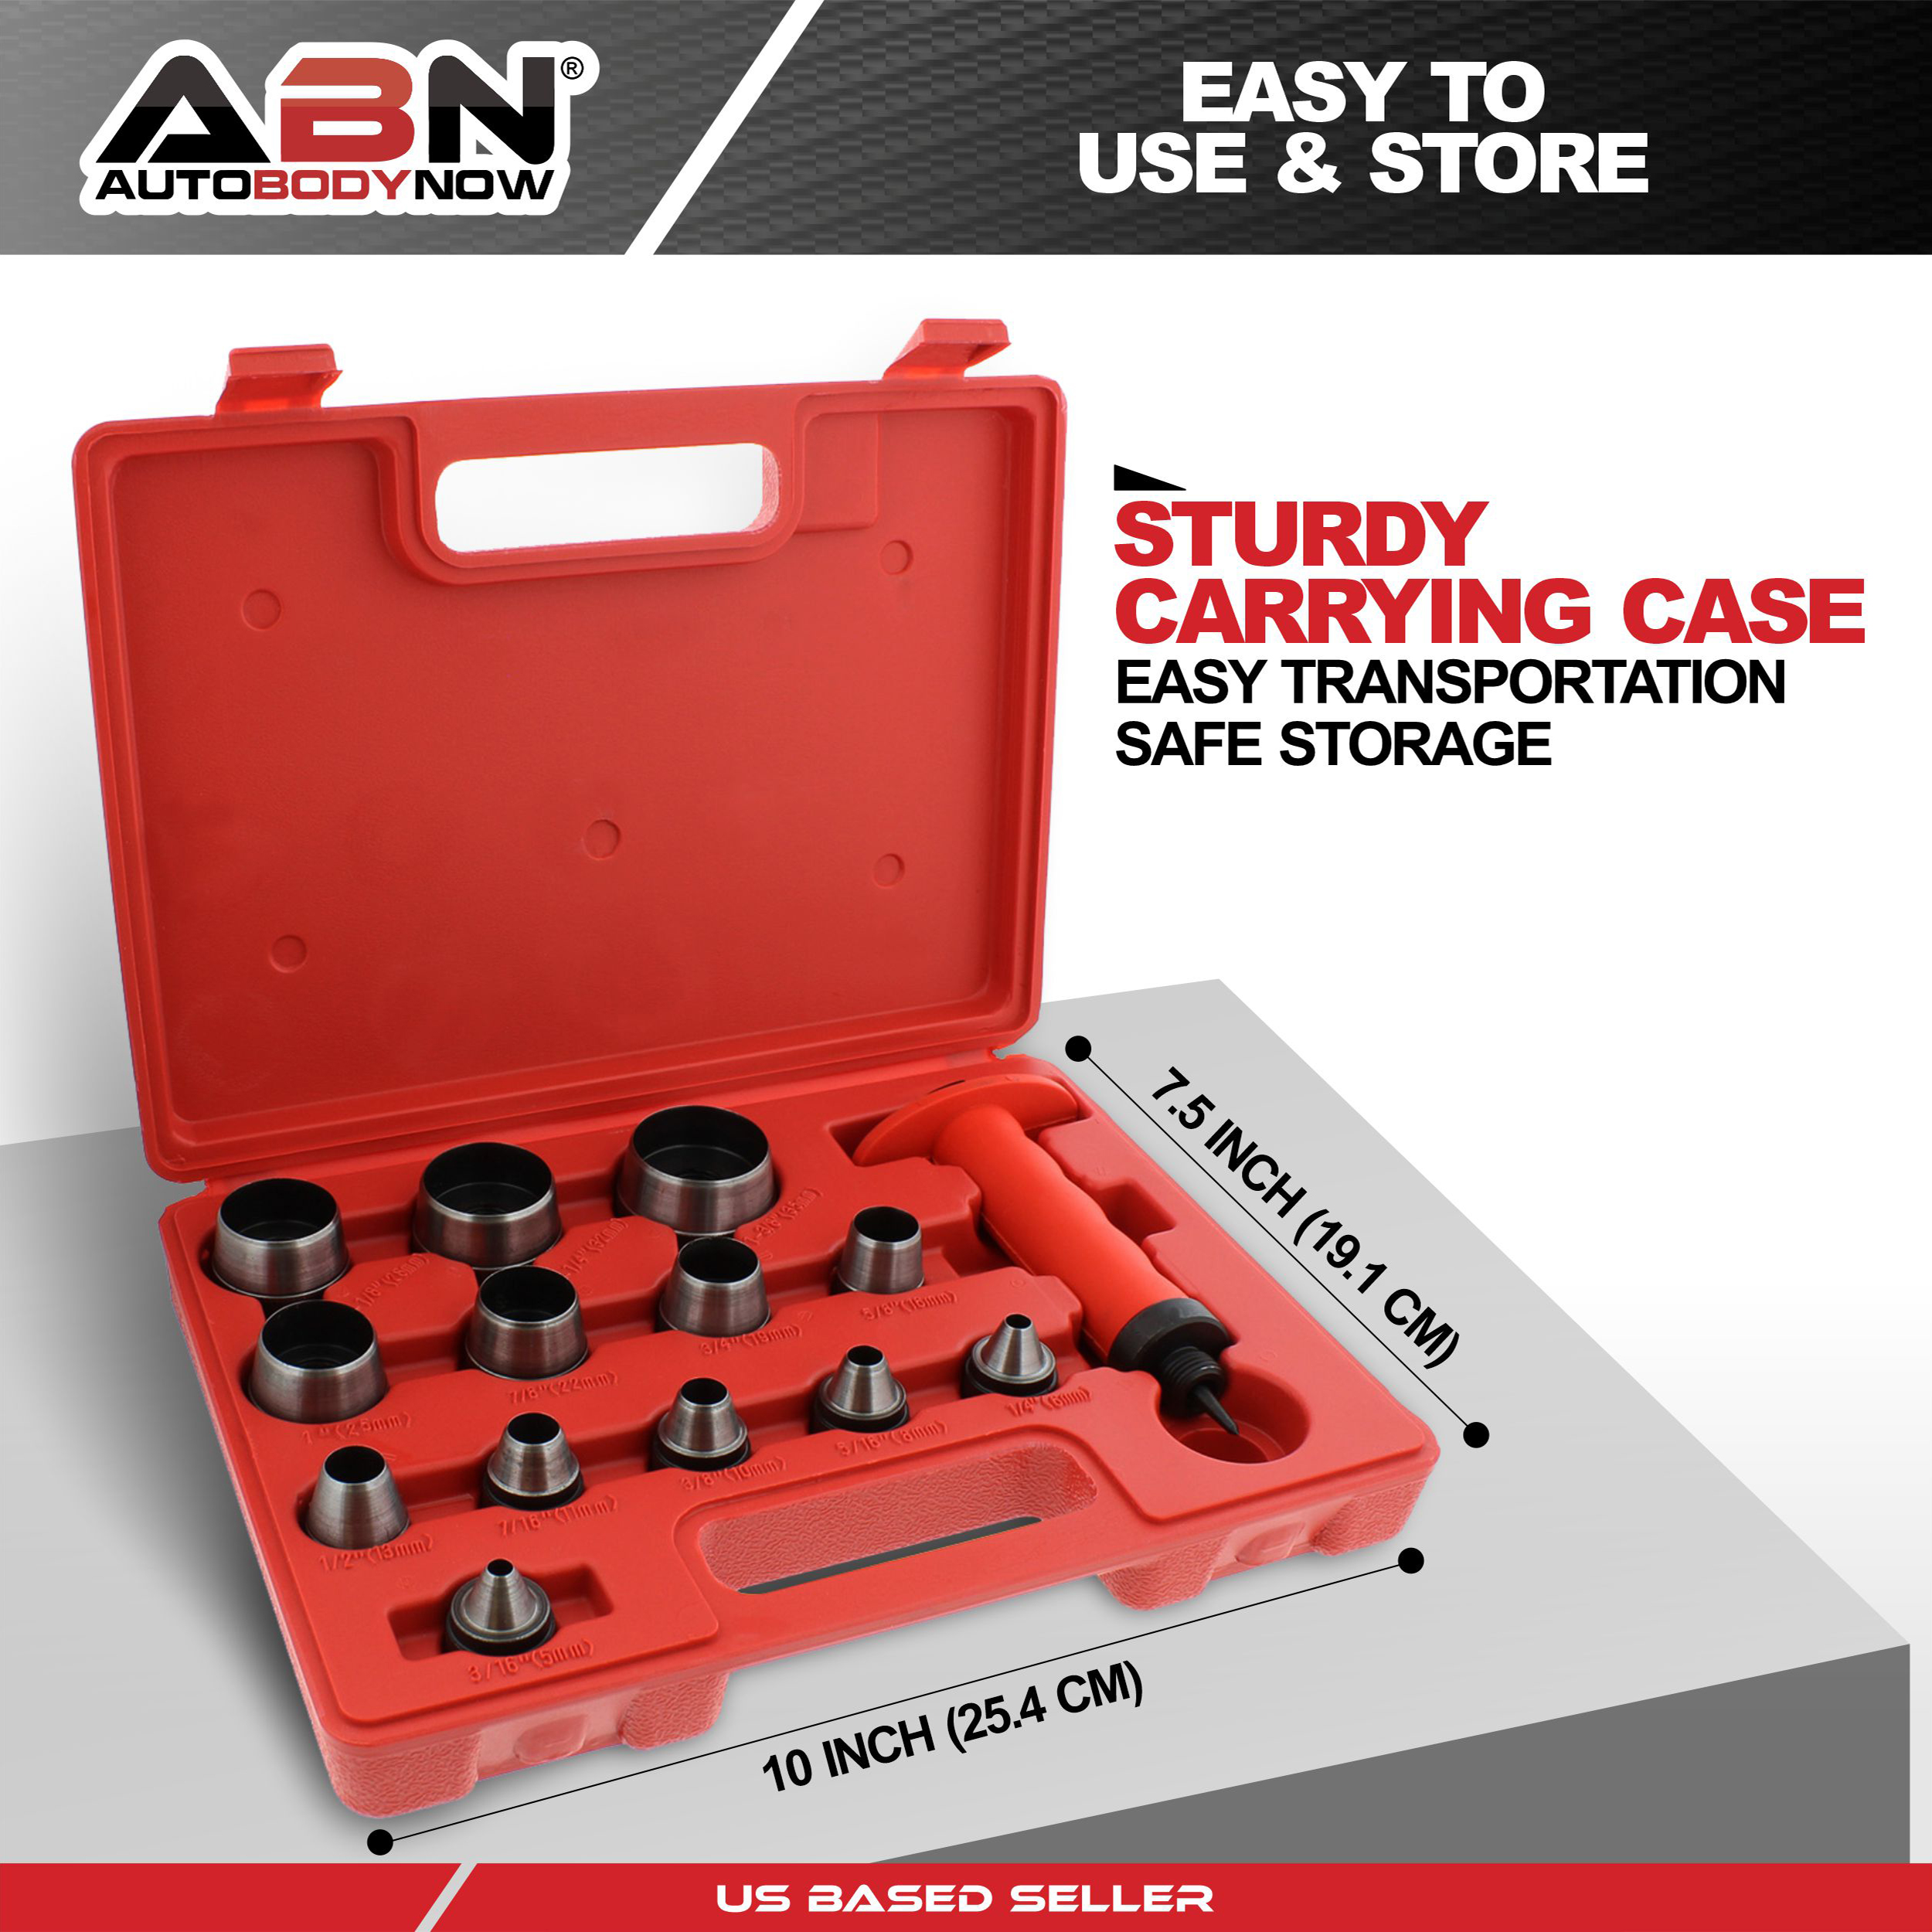 ABN 13 in 1 Hole Punch Set, Gasket Punch Set 3/16” to 1-3/8” 